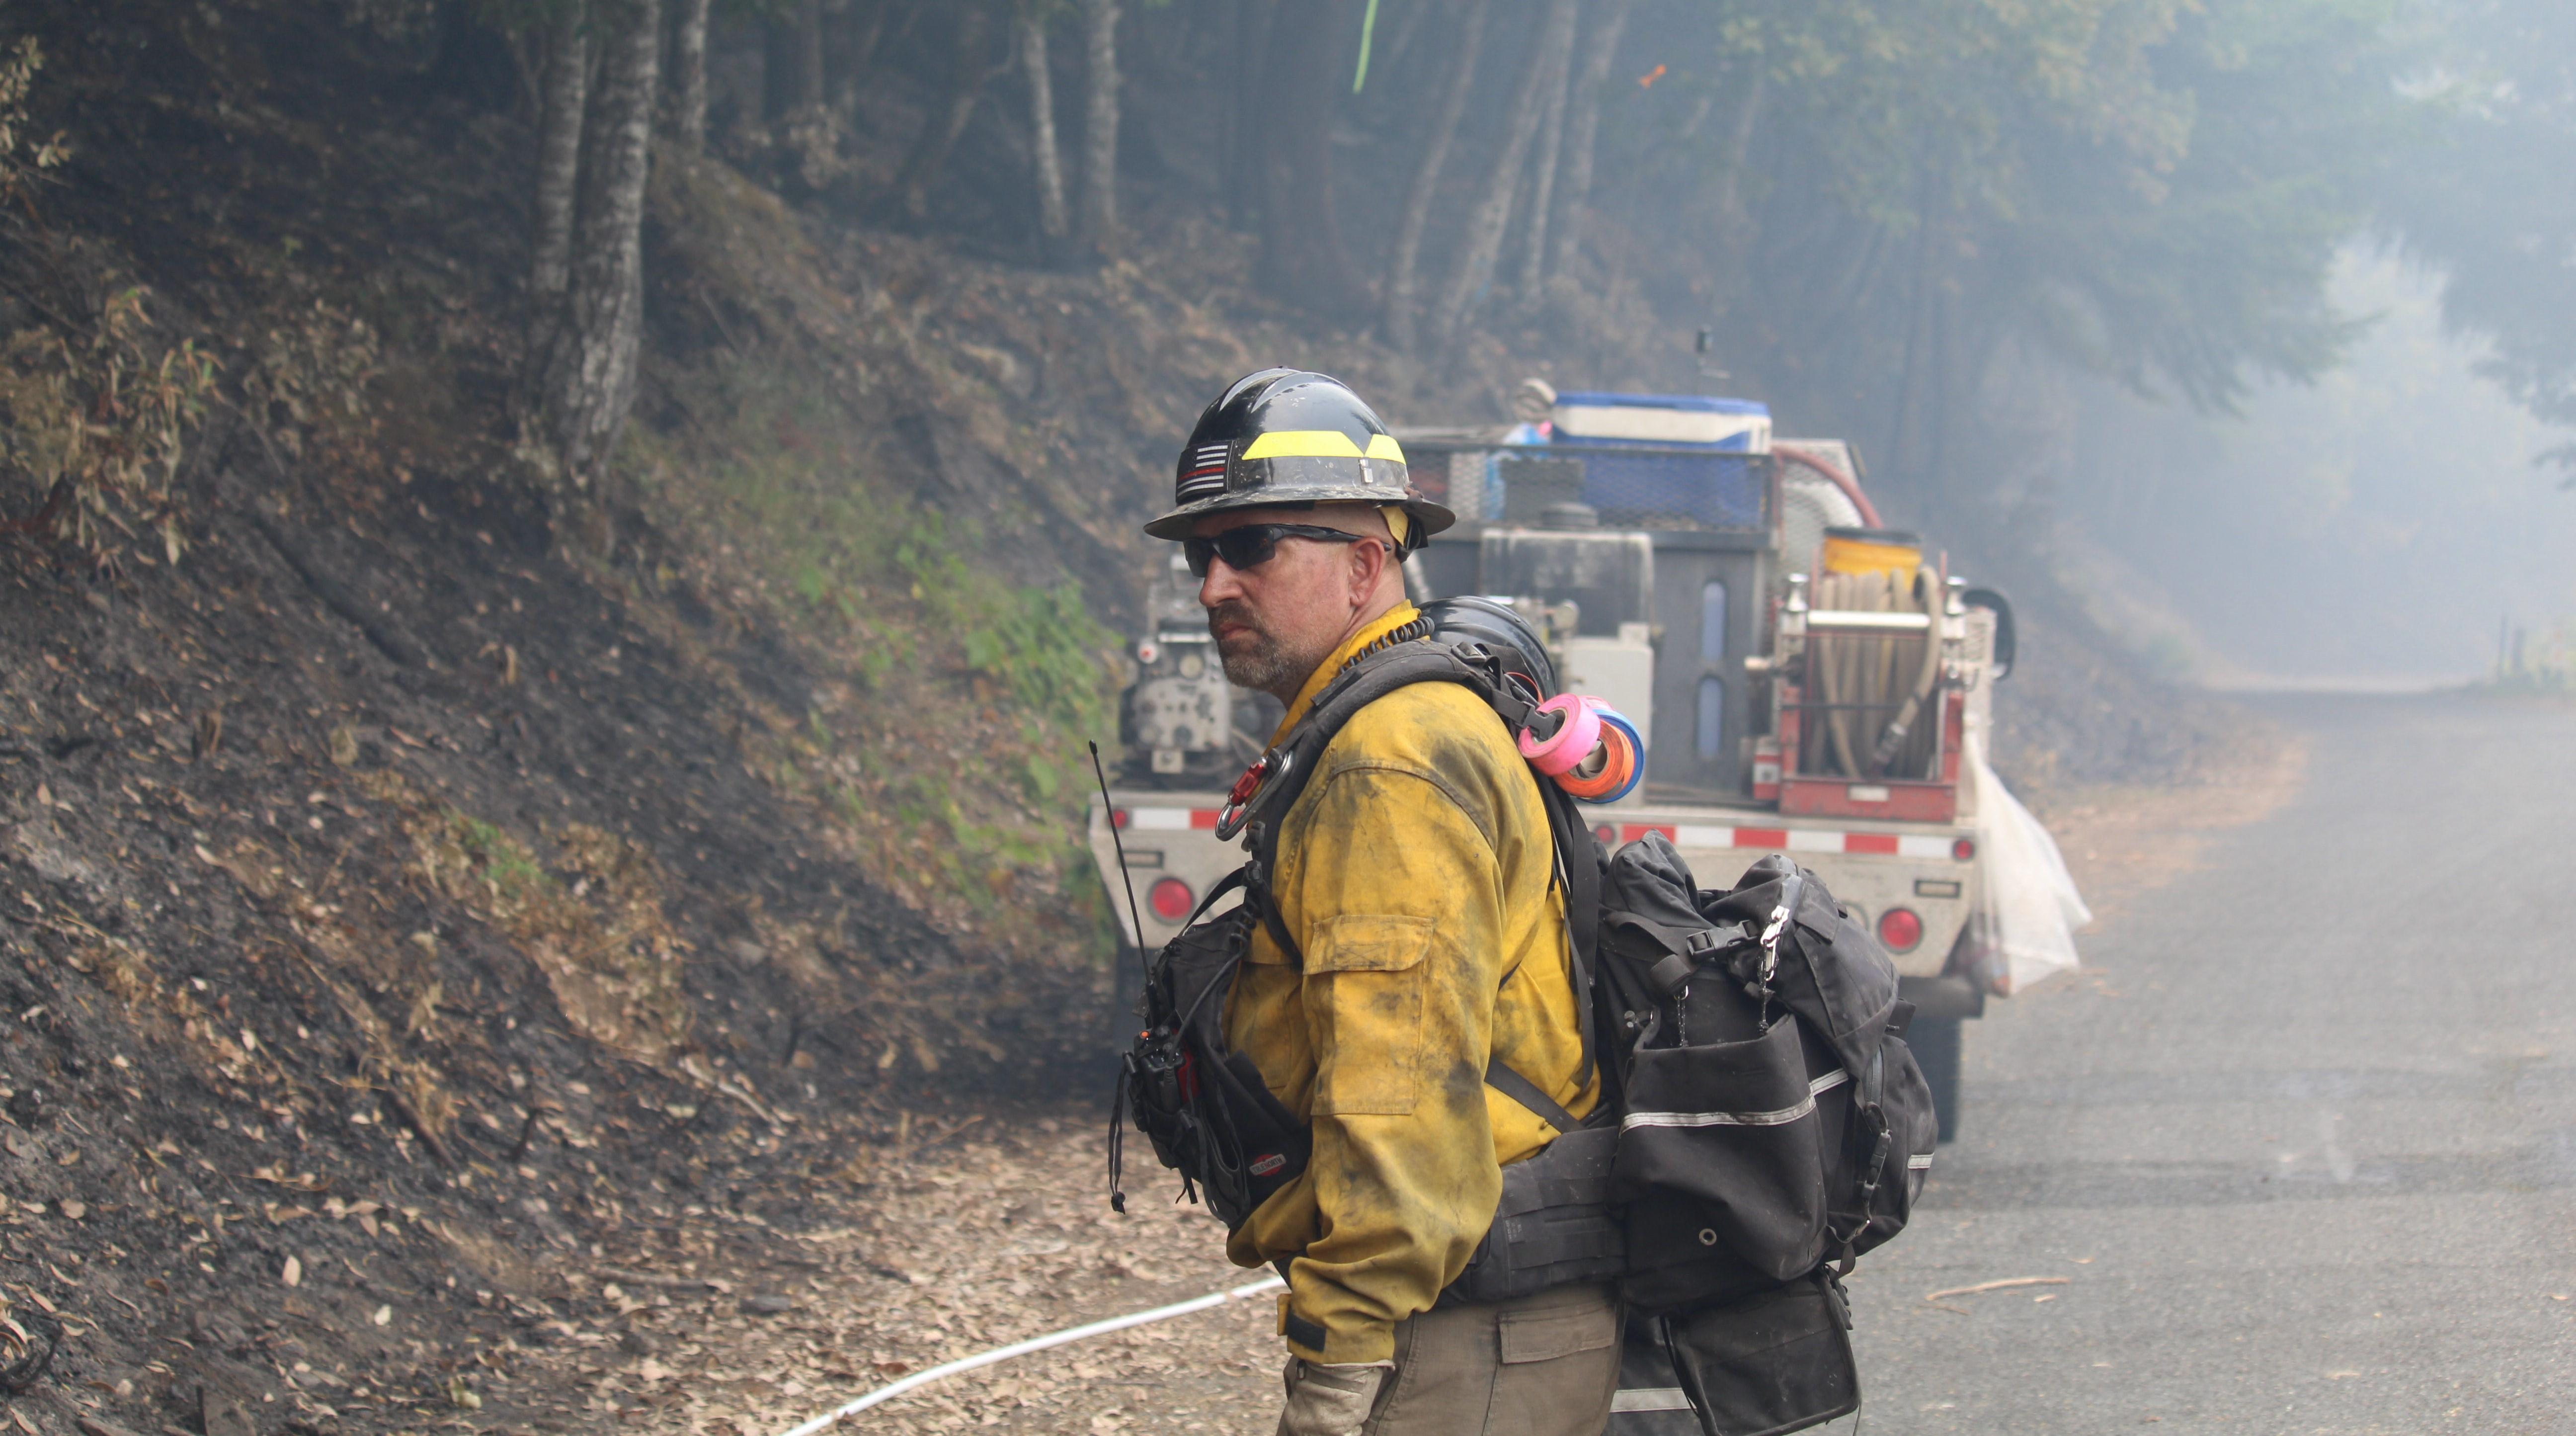 A firefighter in wildfire gear with a black helmet and sunglasses standing on a road near a steep embankment